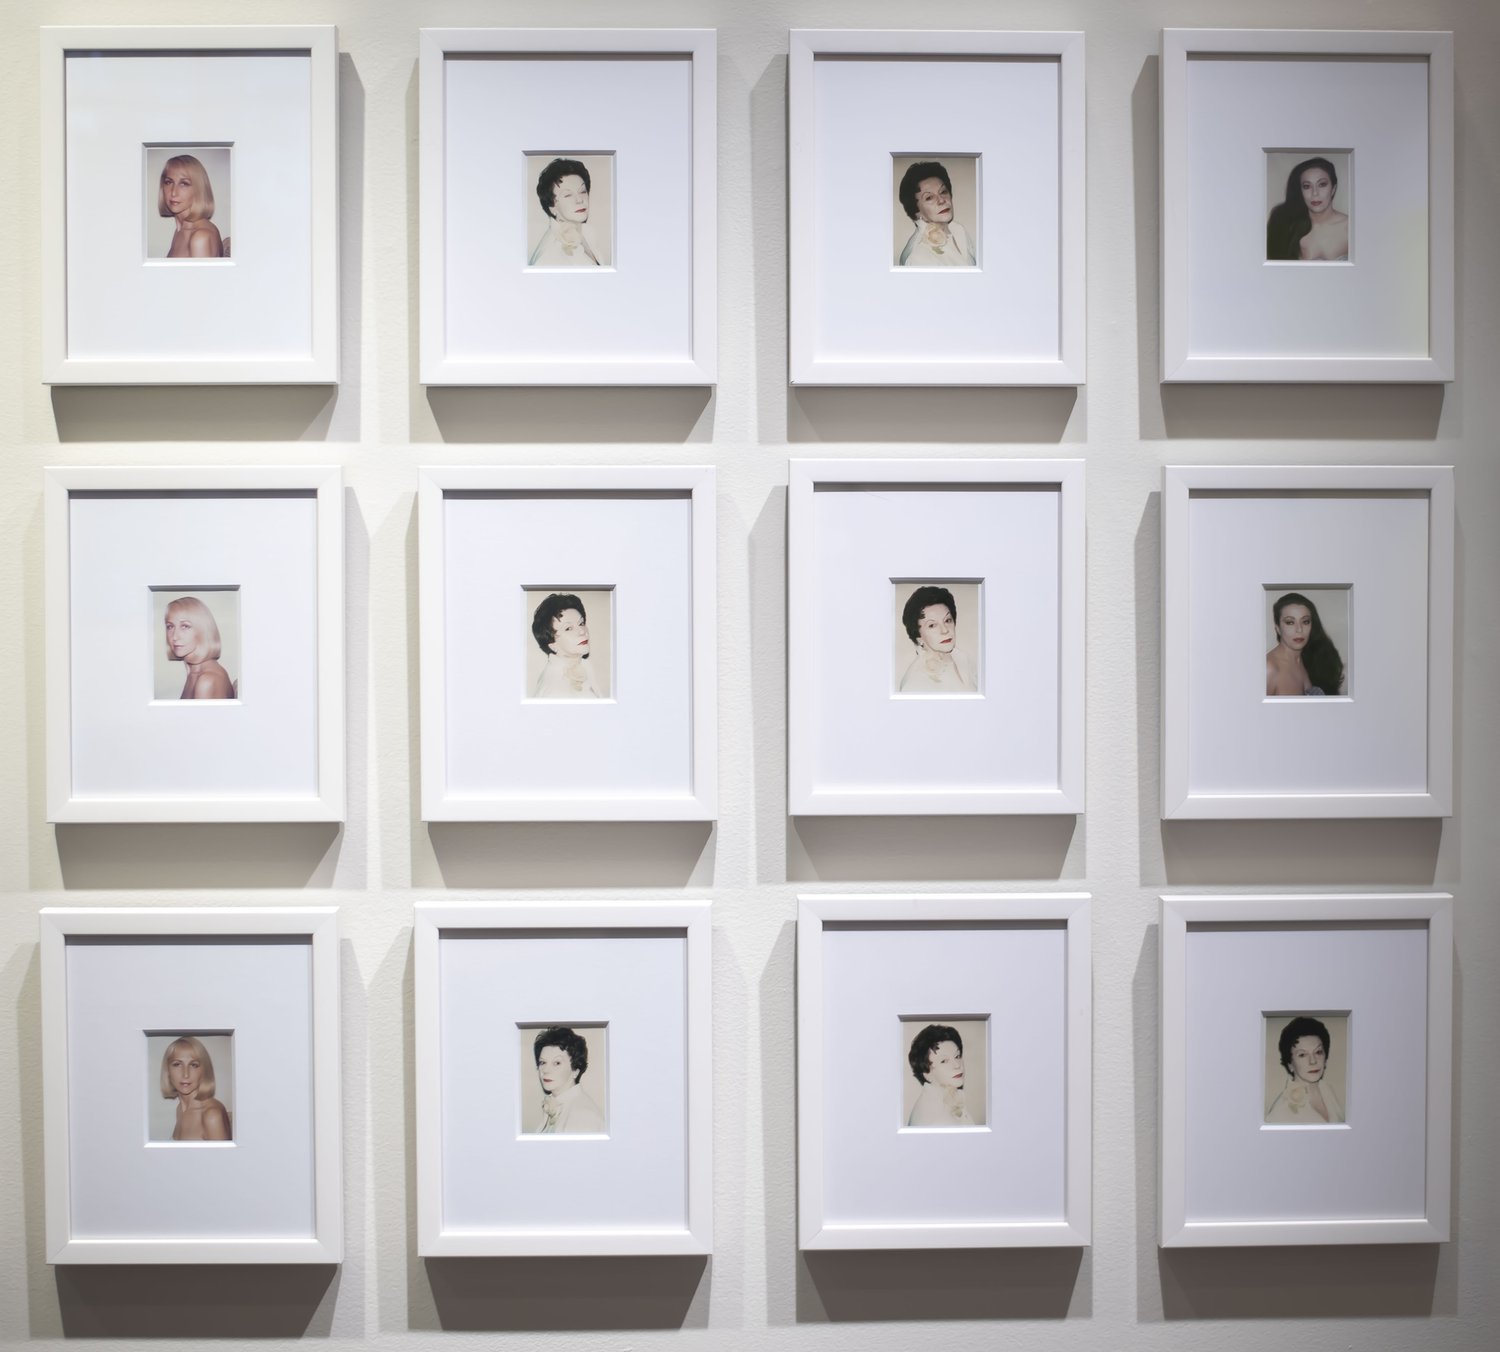 Gallery view of Warhol's portraits hanging in a grid.